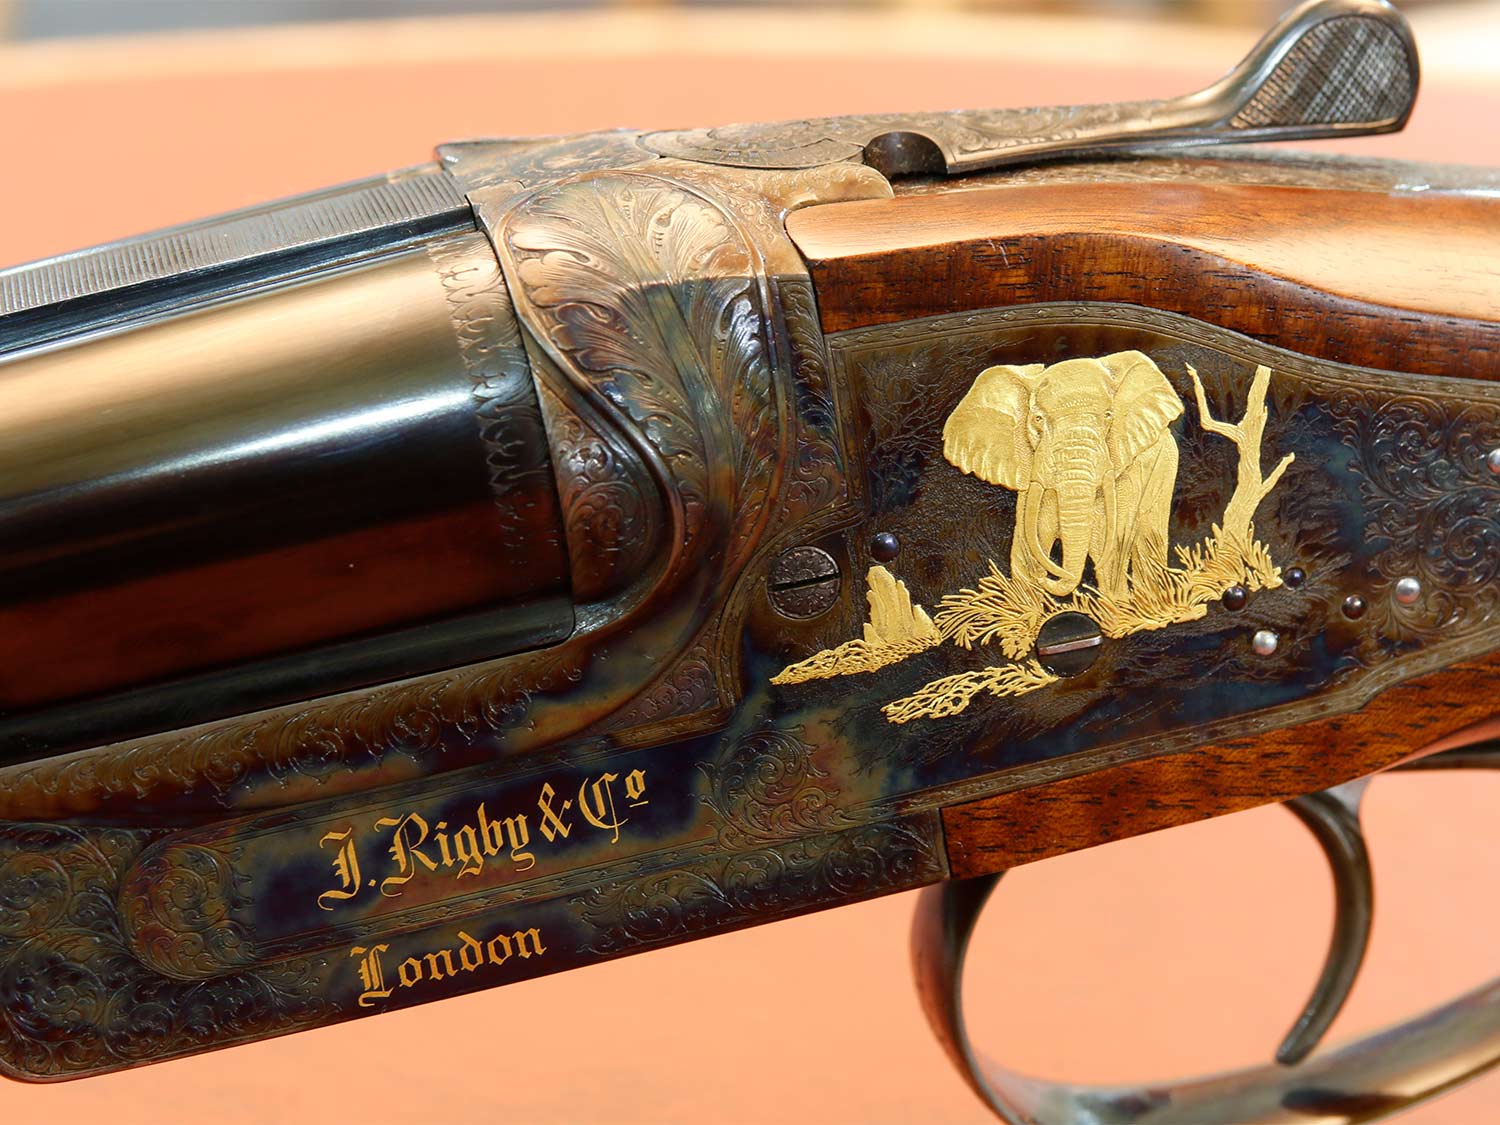 Closeup detail of a rifle stock showing custom engraving and an elephant inlay made of gold.